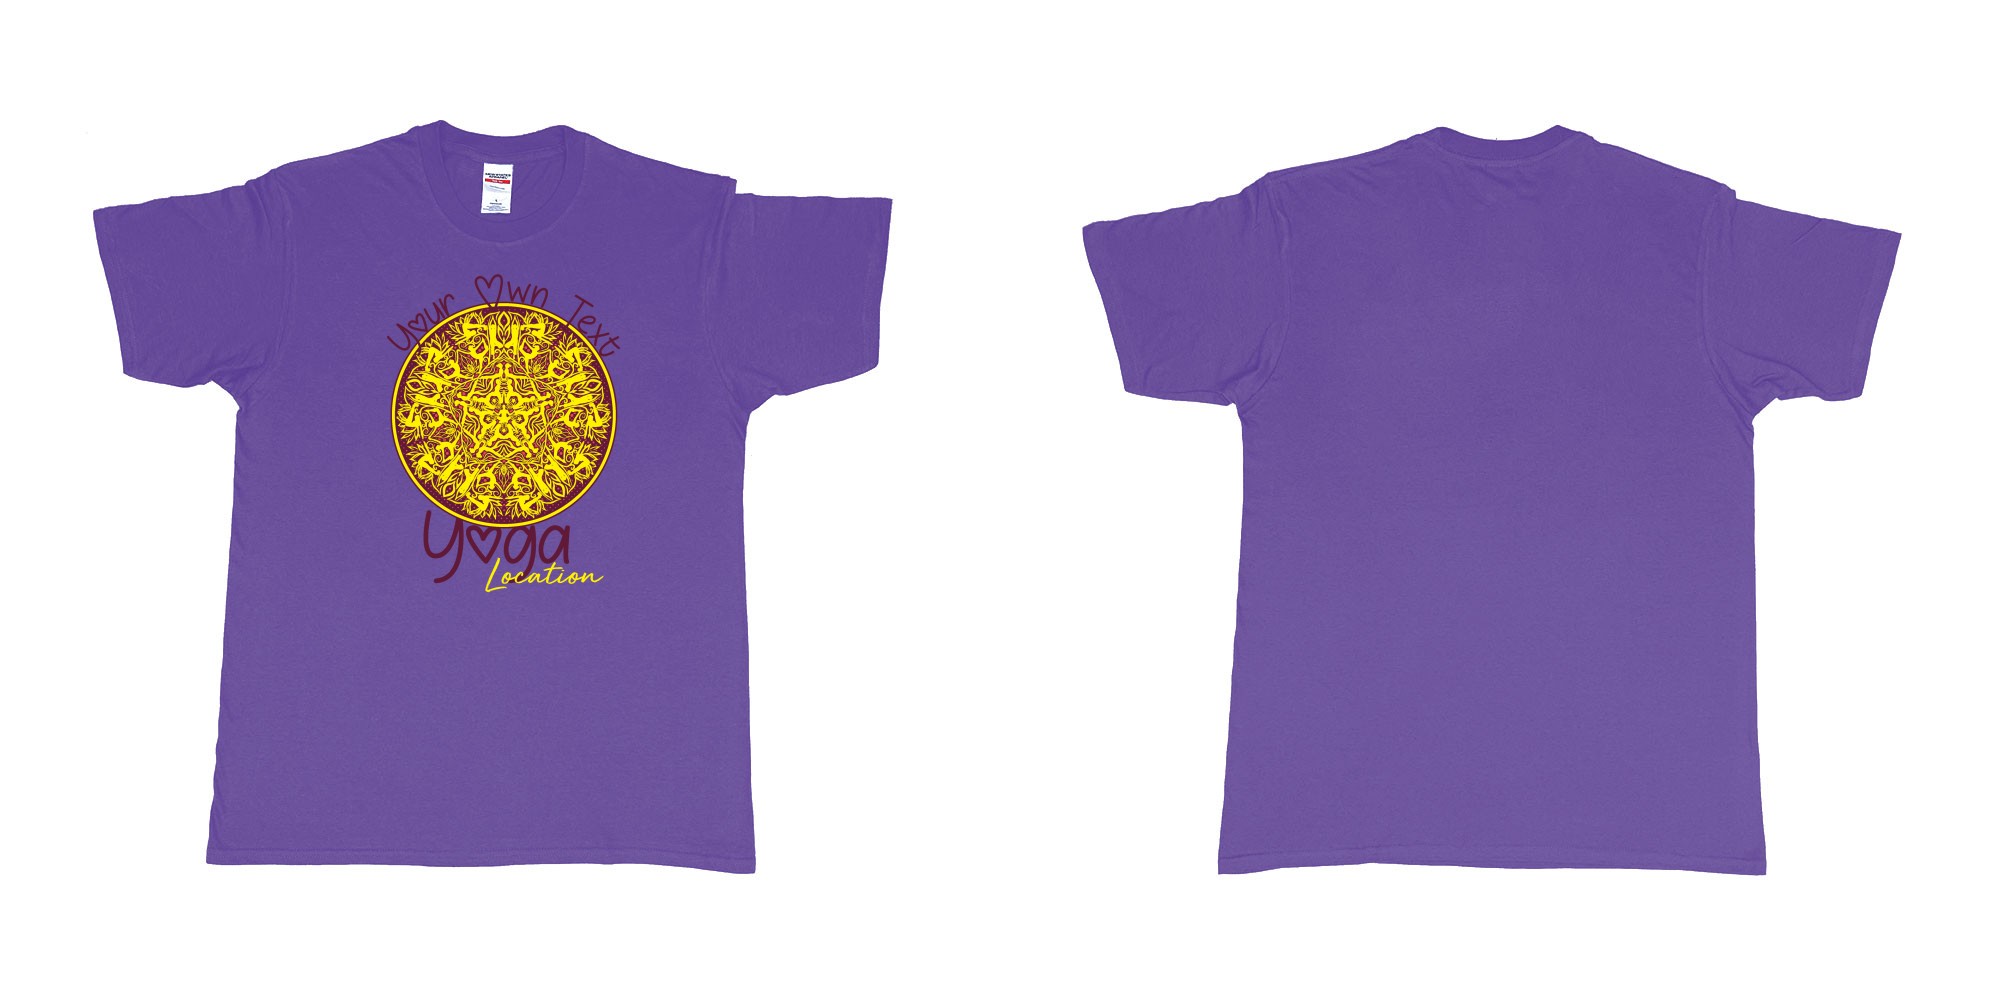 Custom tshirt design yoga mandala with people doing different yoga poses asanas own custom text printing in fabric color purple choice your own text made in Bali by The Pirate Way